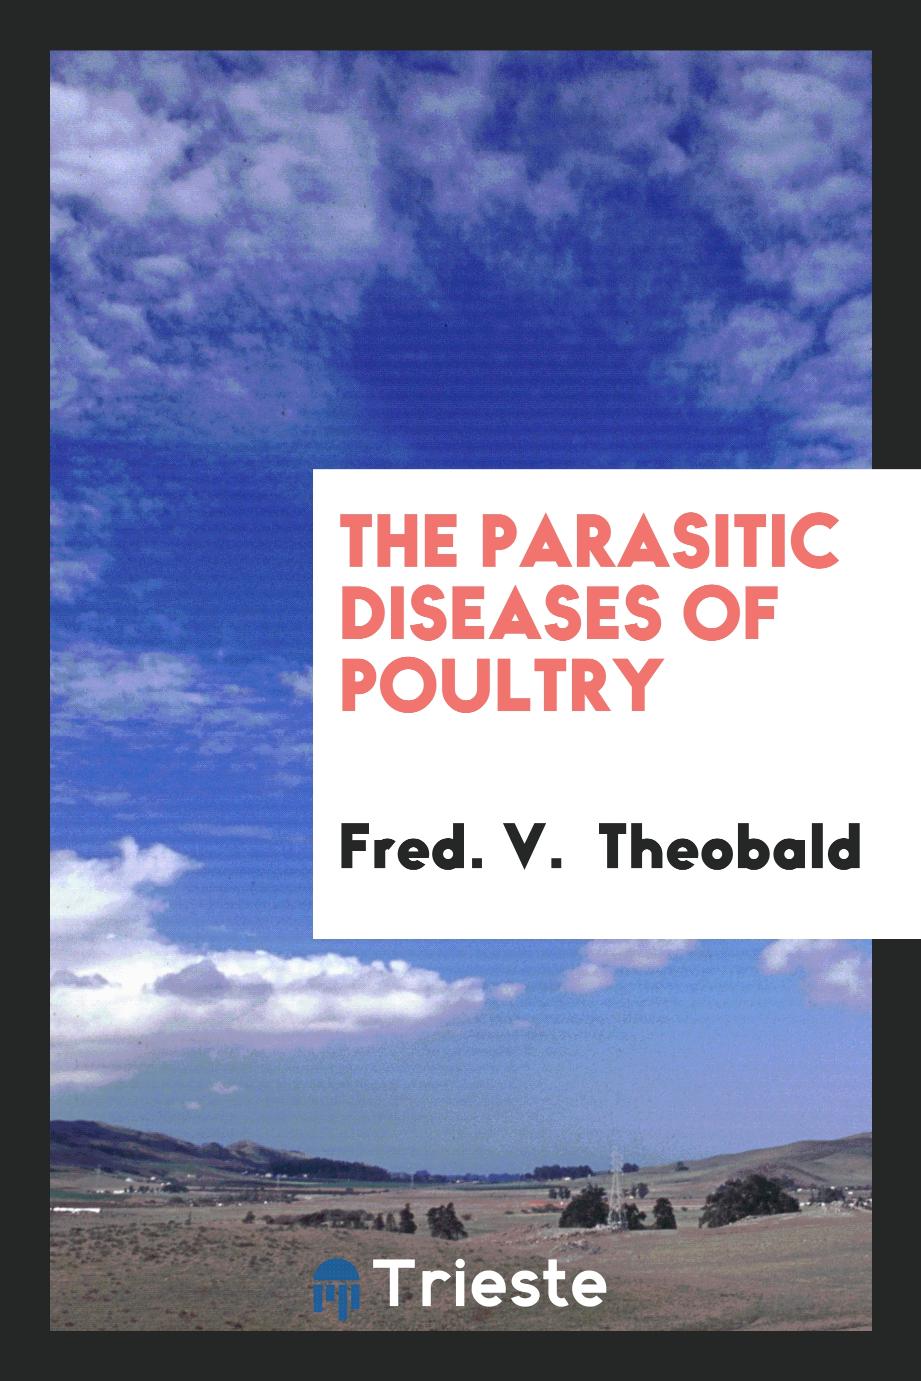 The Parasitic Diseases of Poultry